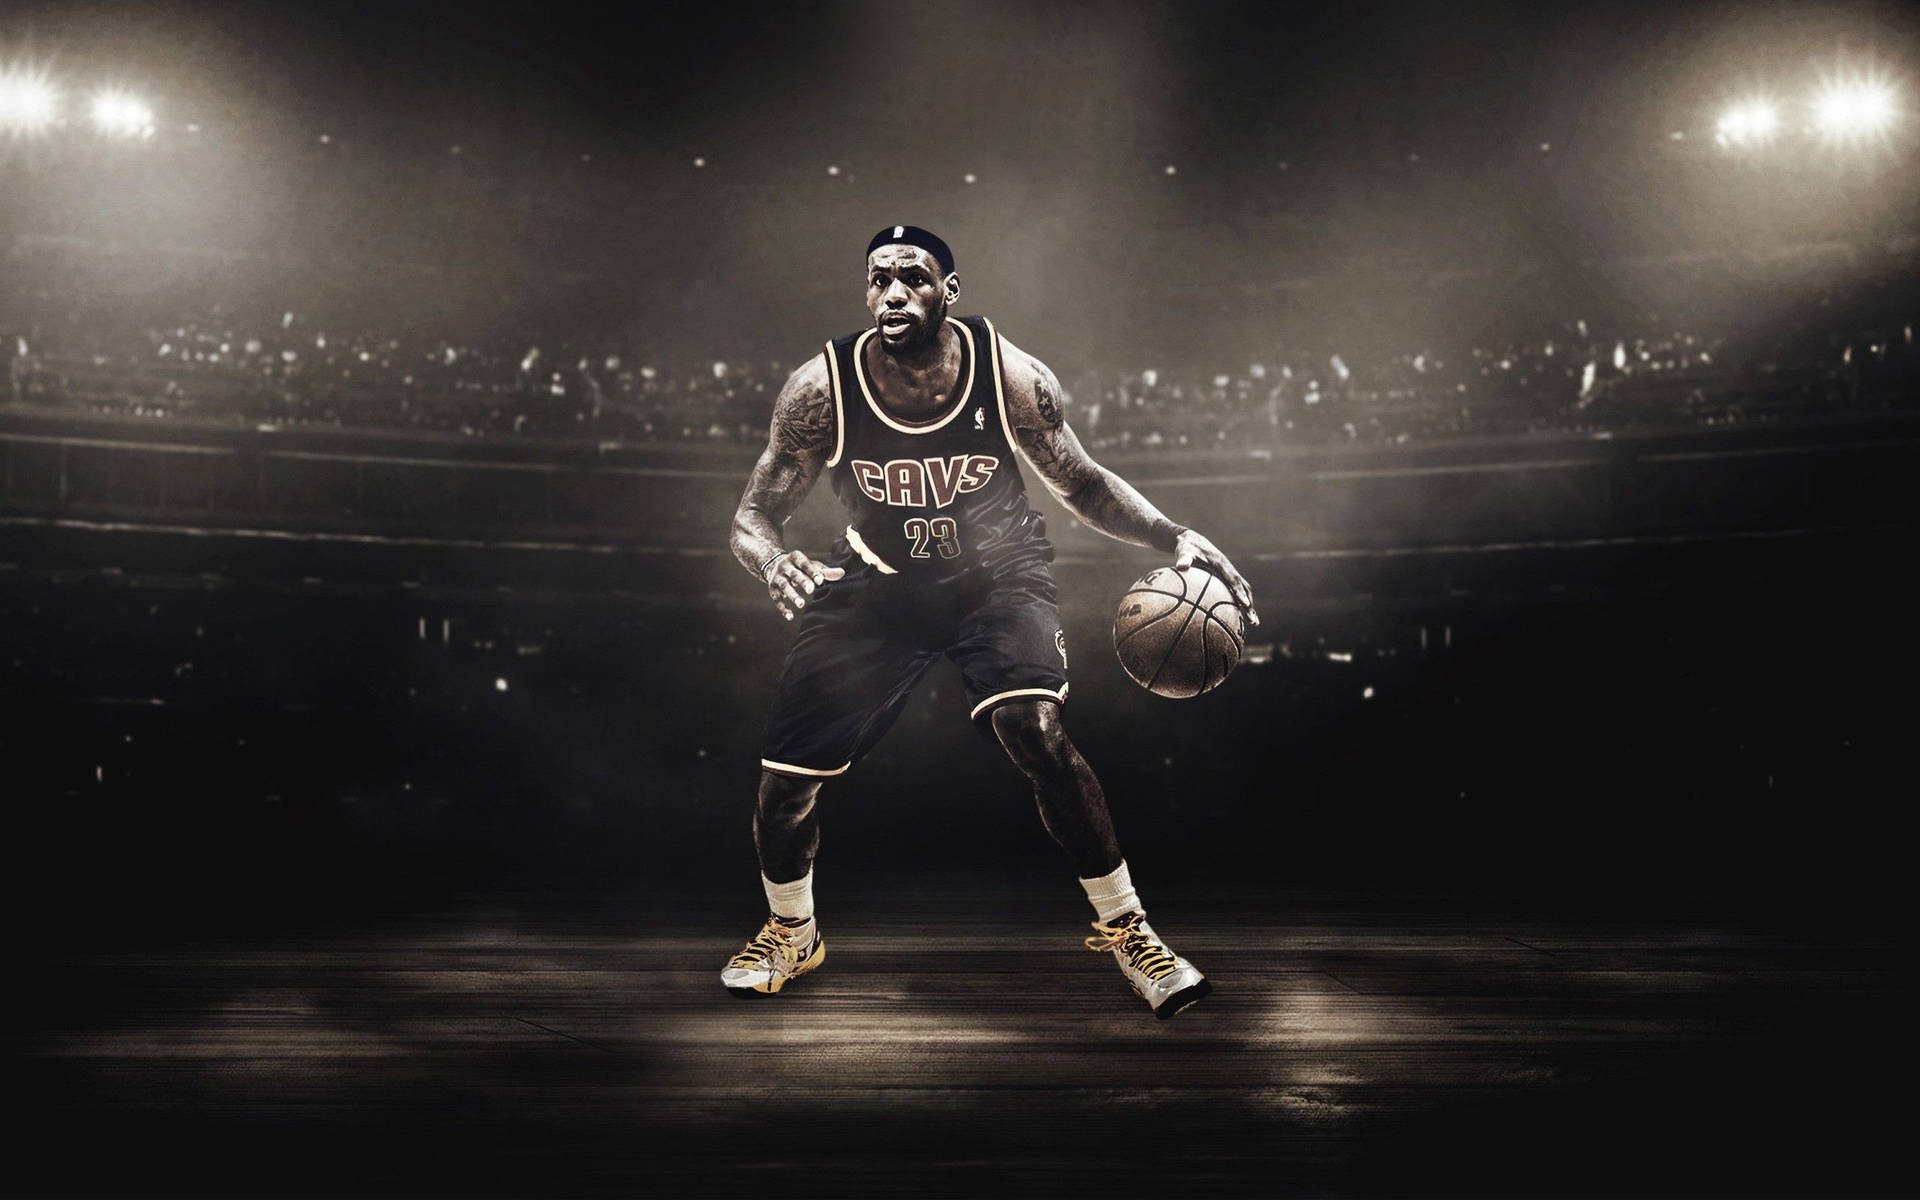 Lebron James 2015 Wallpaper is a fantastic wallpaper for basketball fans. This wallpaper features the famous basketball player, Lebron James. - Lebron James